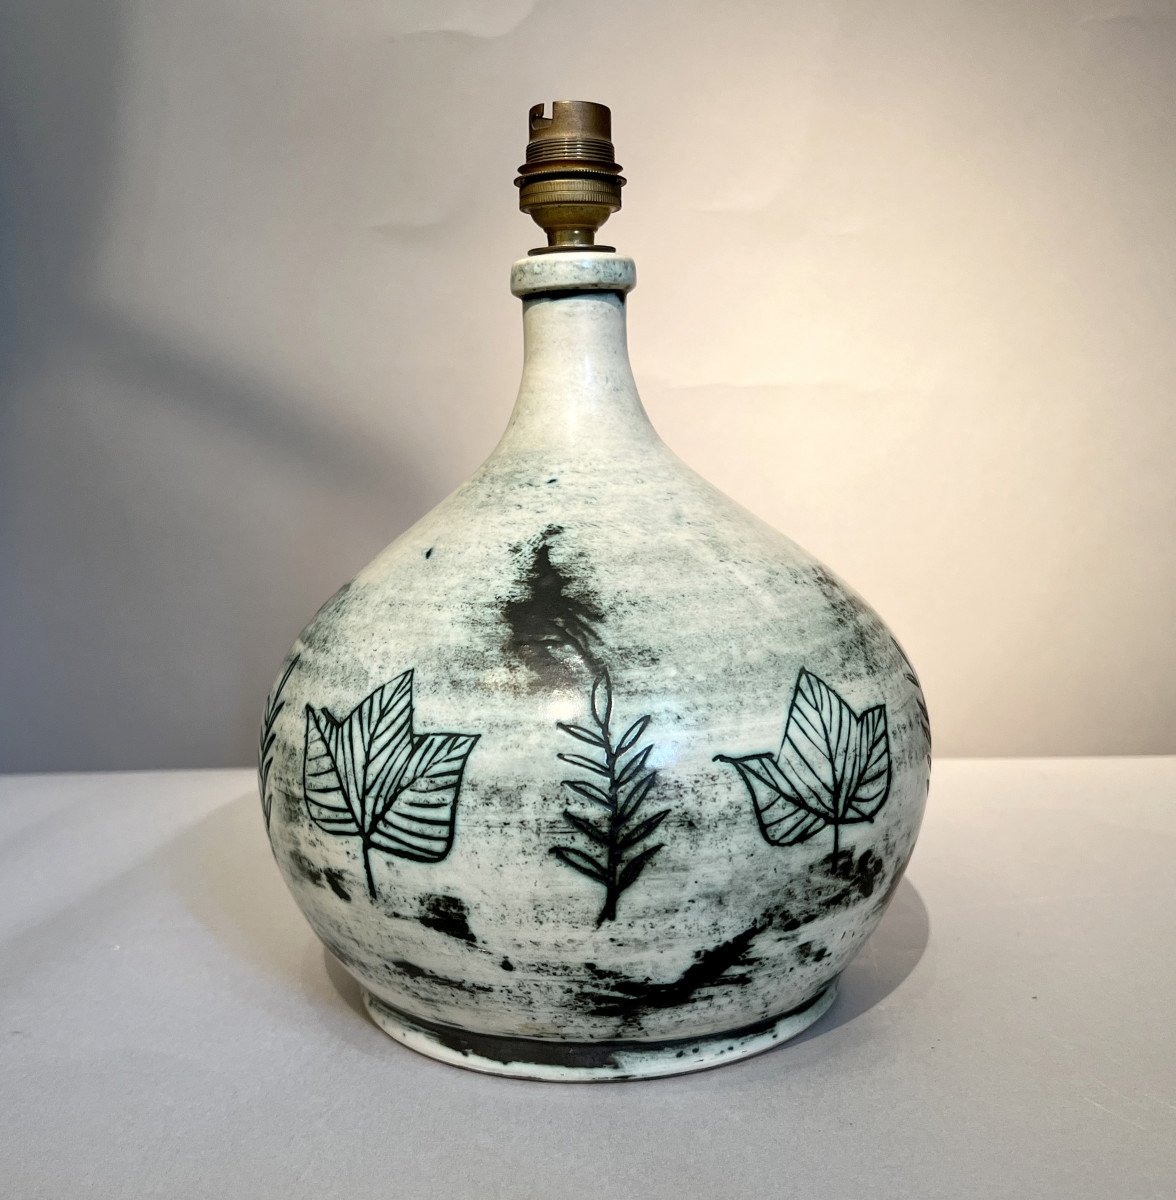 Ceramic Egg-shaped Lamp Base With Incised Foliage Decoration, By Jacques Blin, Paris, France, C-photo-2